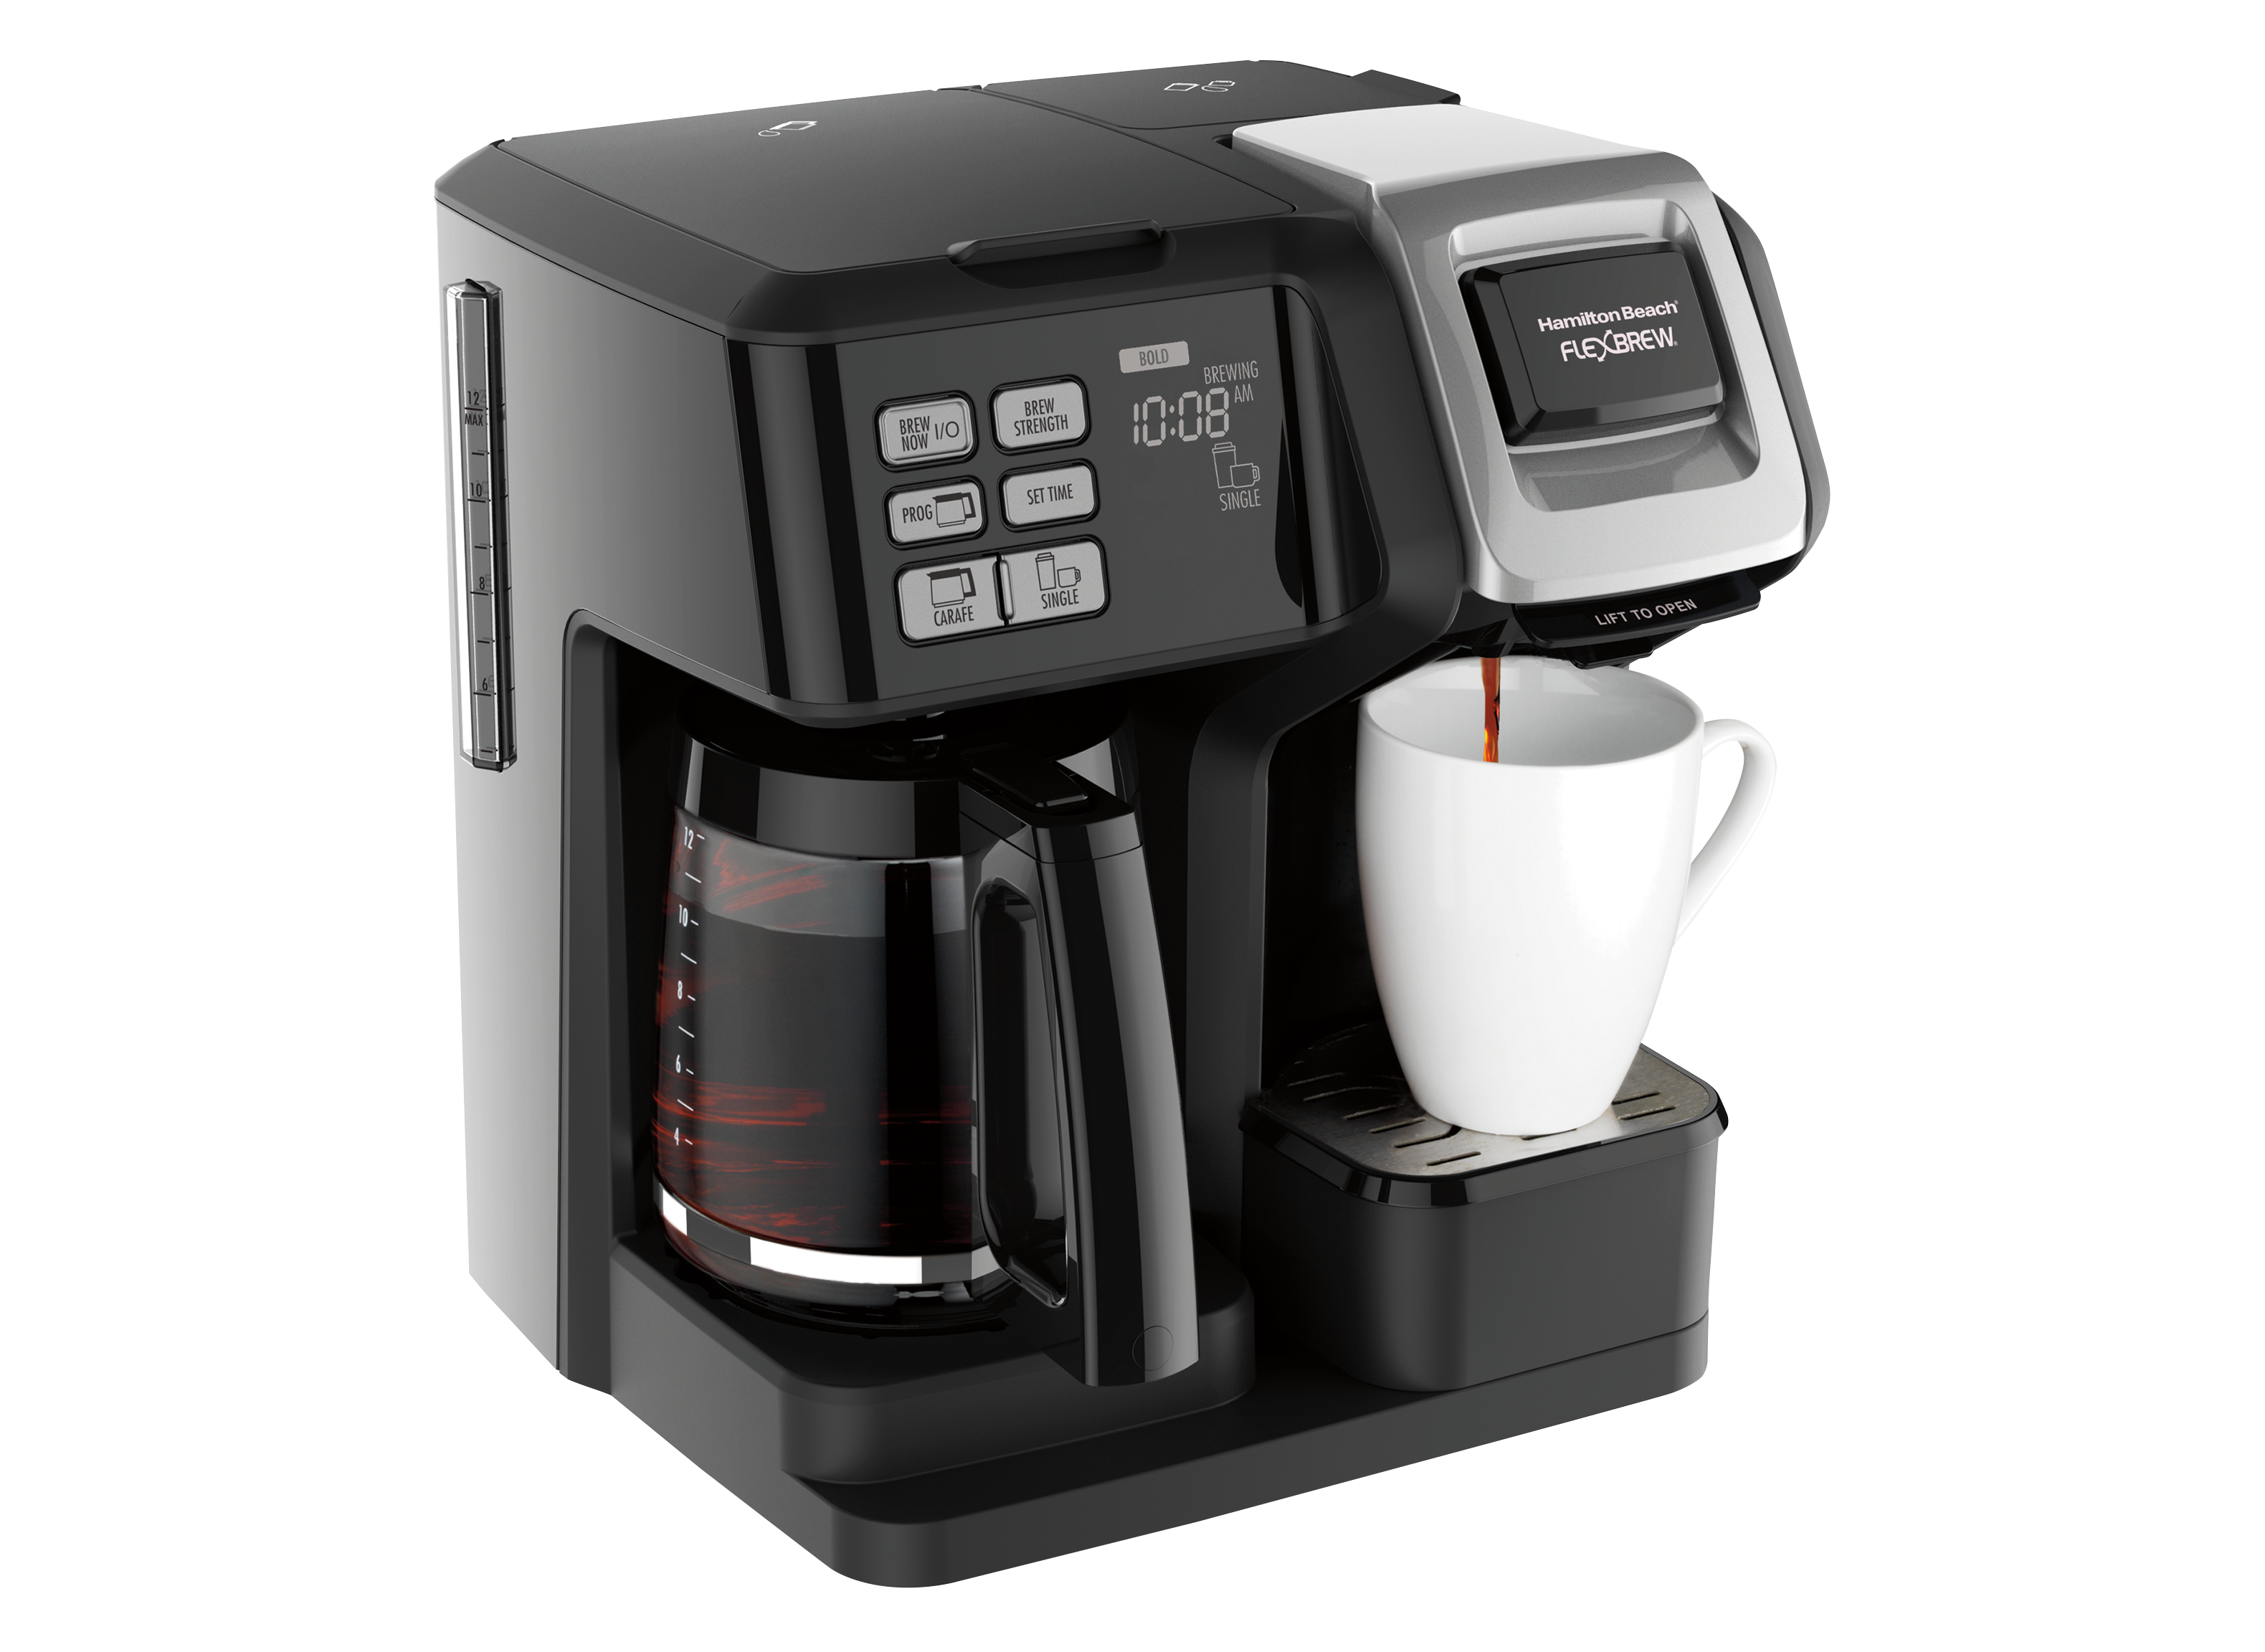 https://crdms.images.consumerreports.org/prod/products/cr/models/393620-pod-coffee-makers-hamilton-beach-flexbrew-2-way-brewer-49976-59286.png